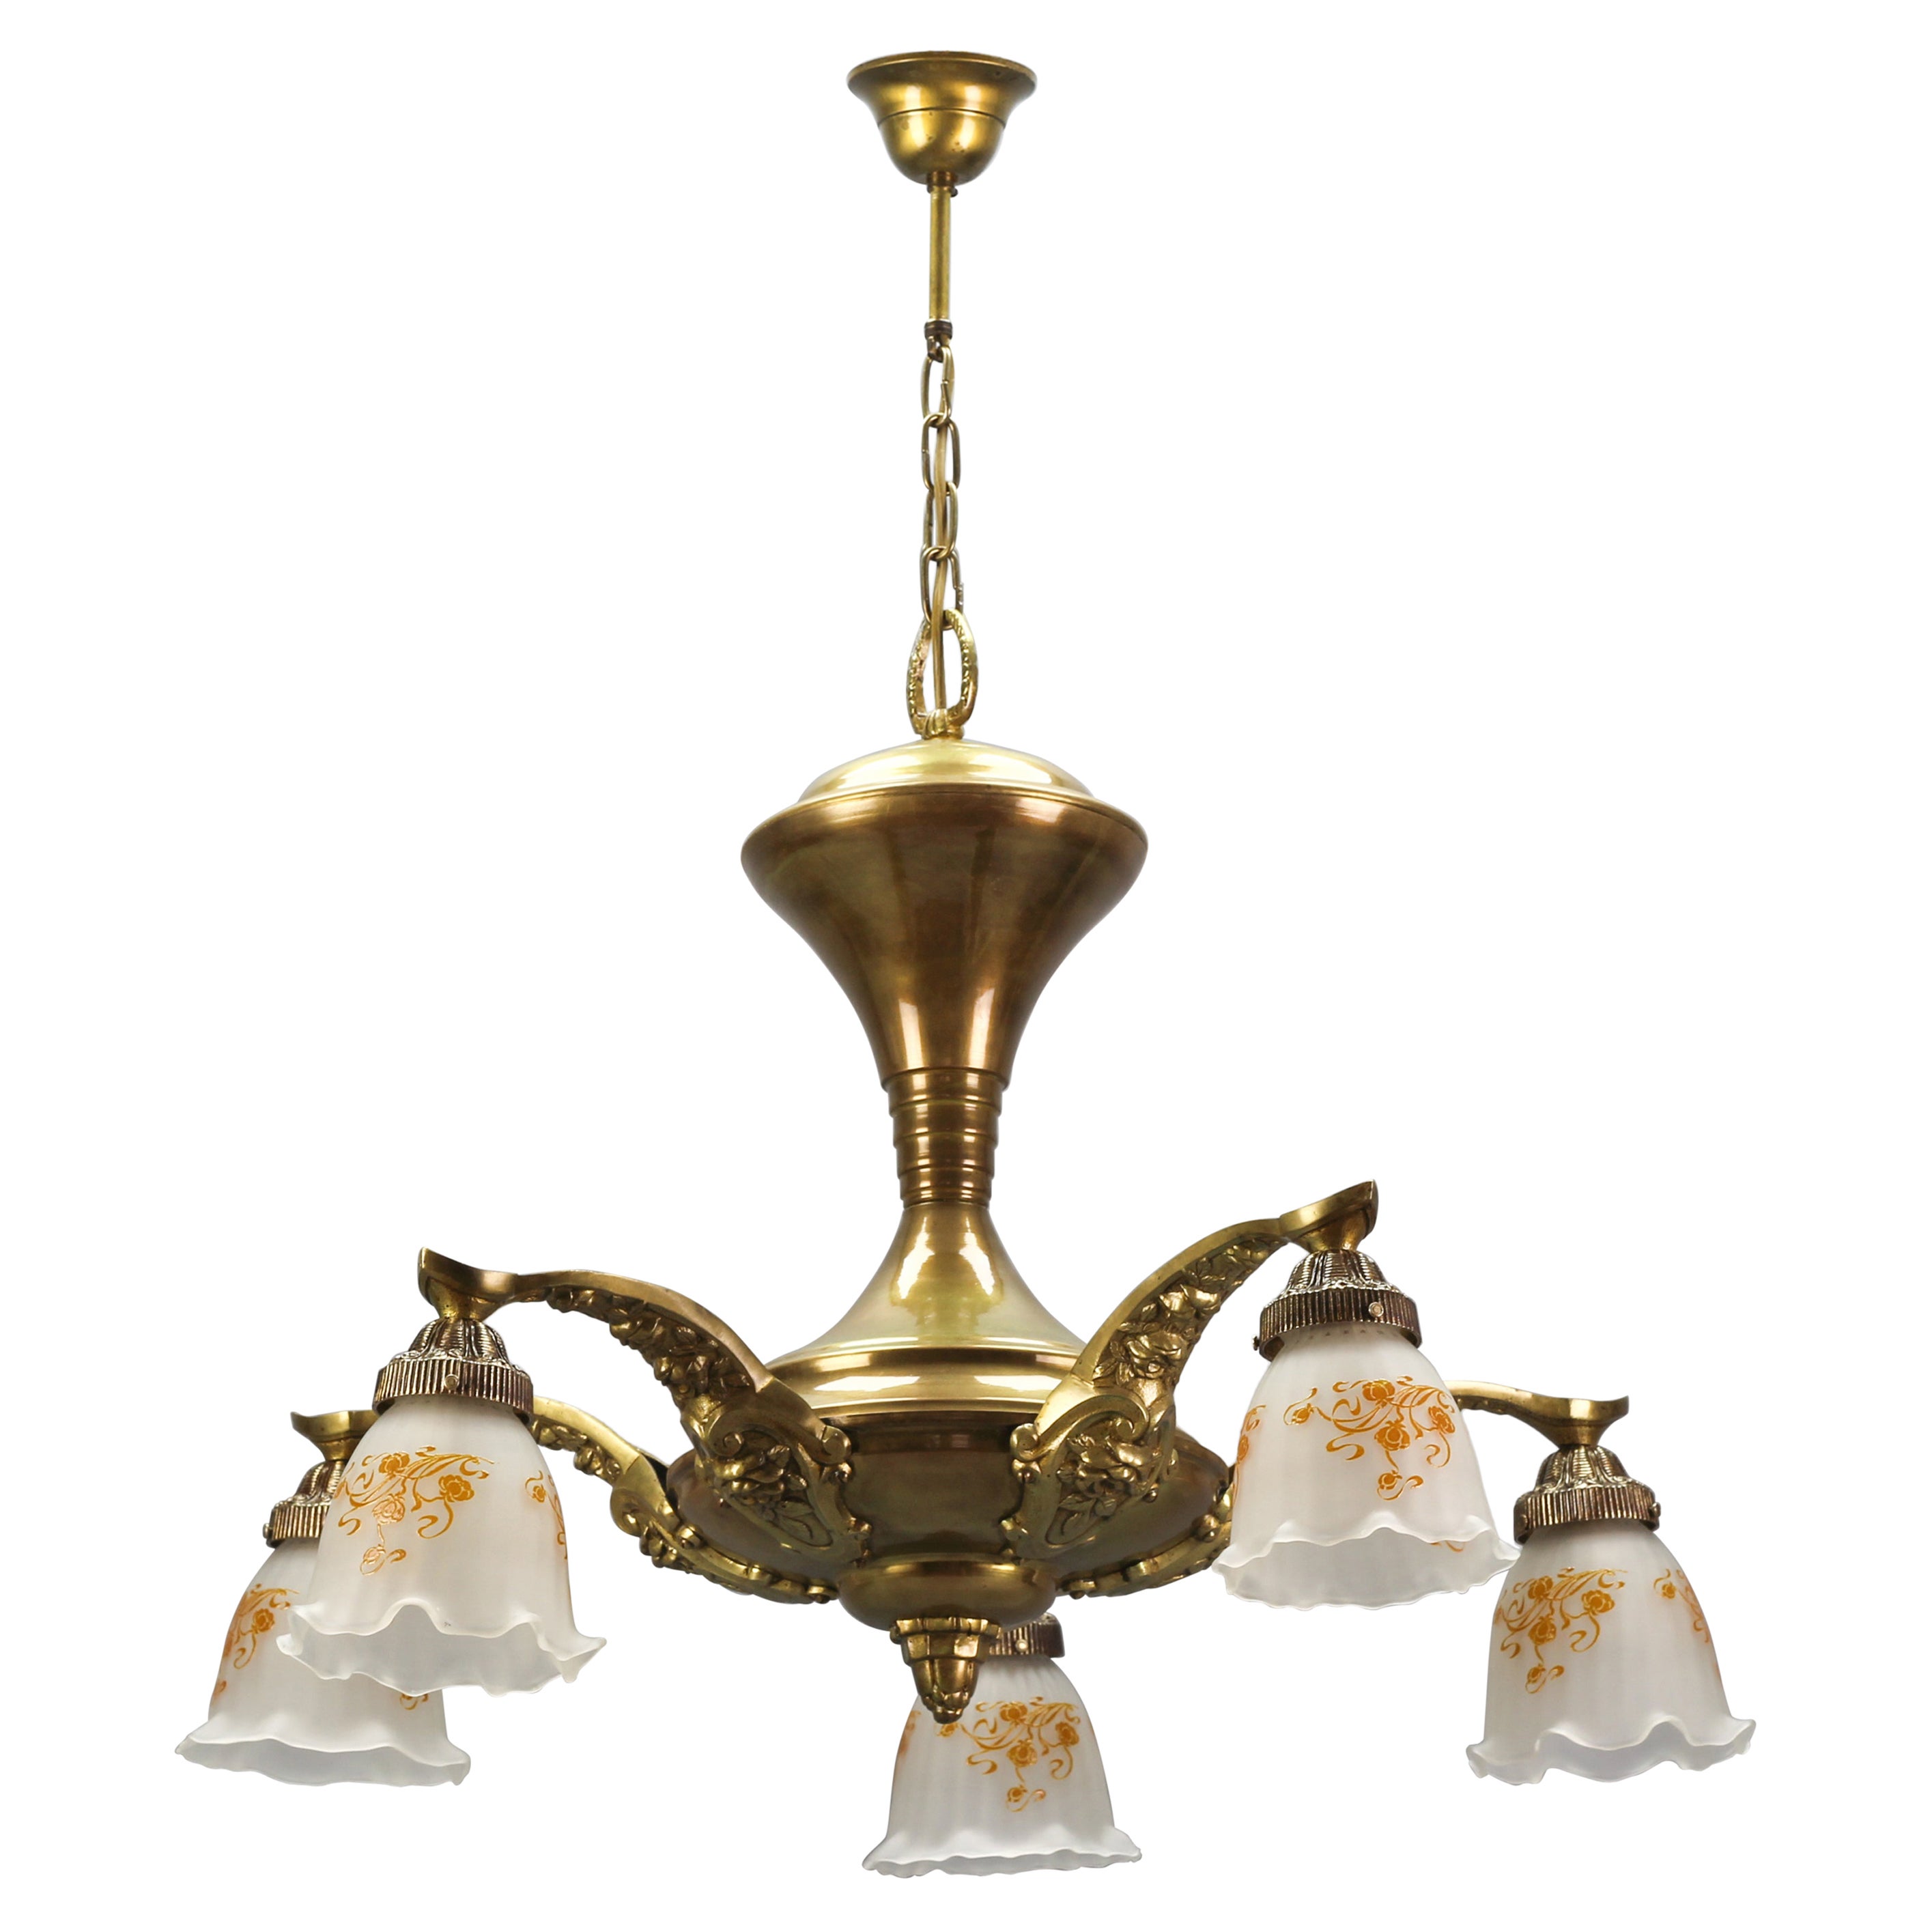 Art Nouveau Brass and Bronze Five-Light Chandelier with Frosted Glass Shades For Sale